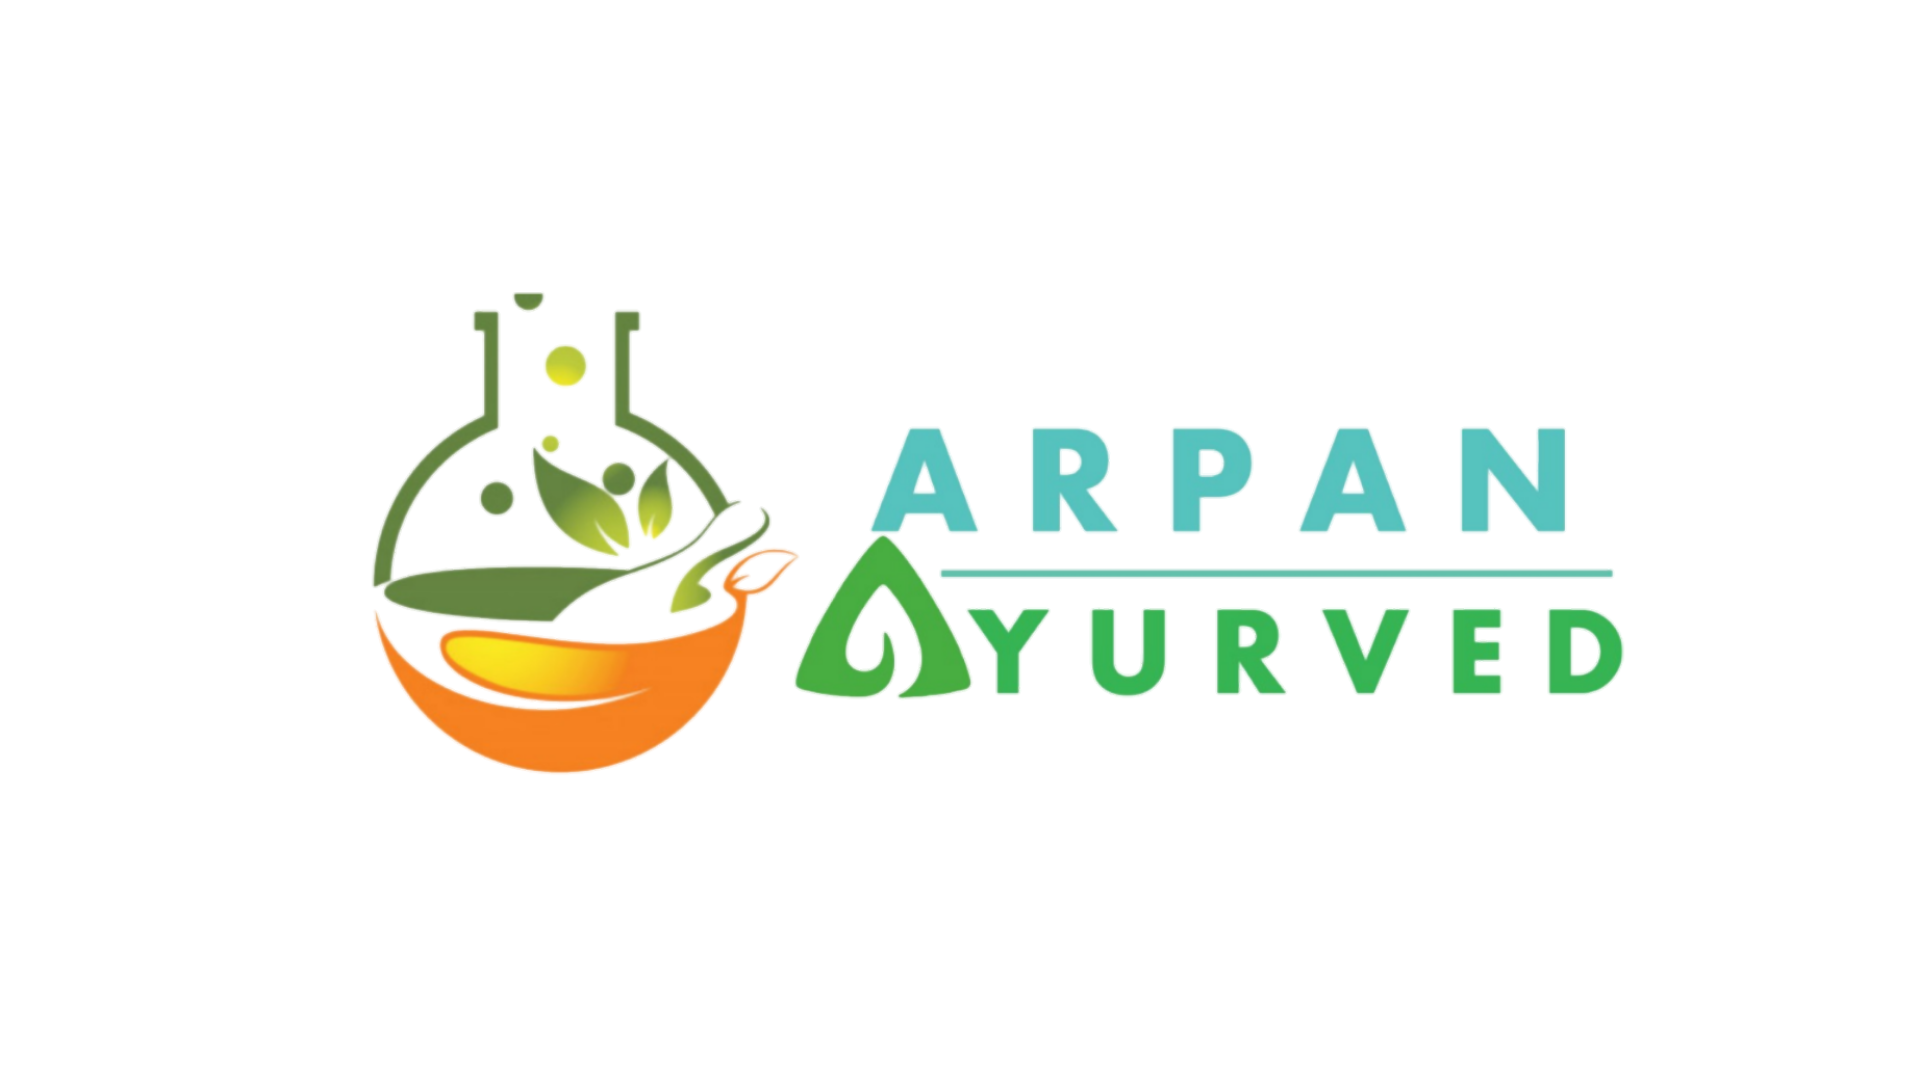 Planet Ayurveda Manufacturers & Treatment Centre in India